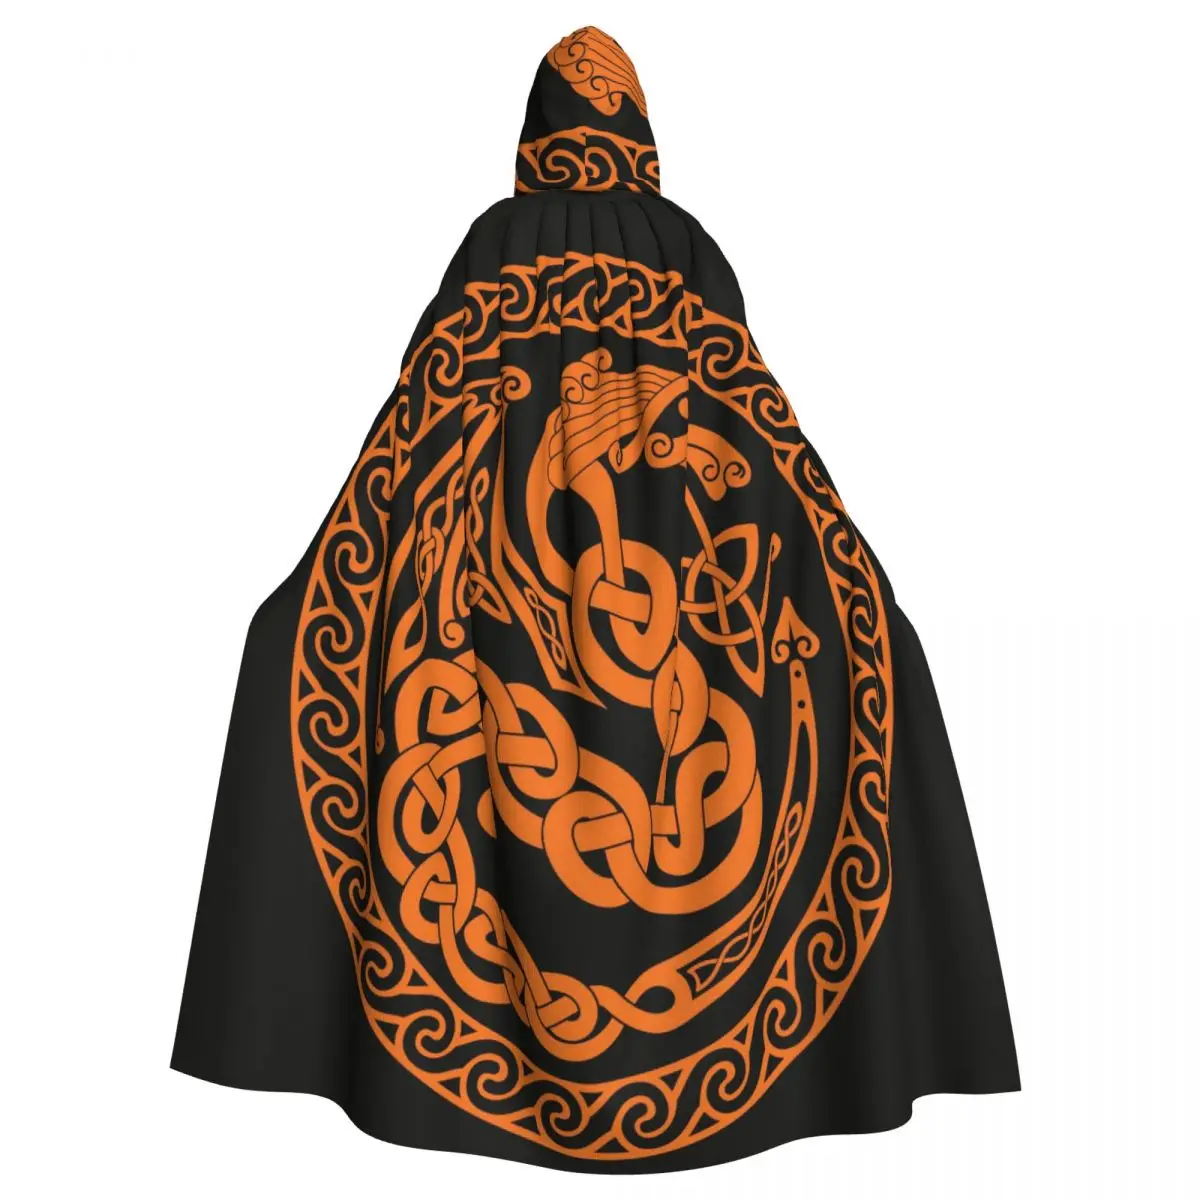 Hooded Cloak Unisex Cloak with Hood Celtic Dragon Cloak Vampire Witch Cape Cosplay Costume